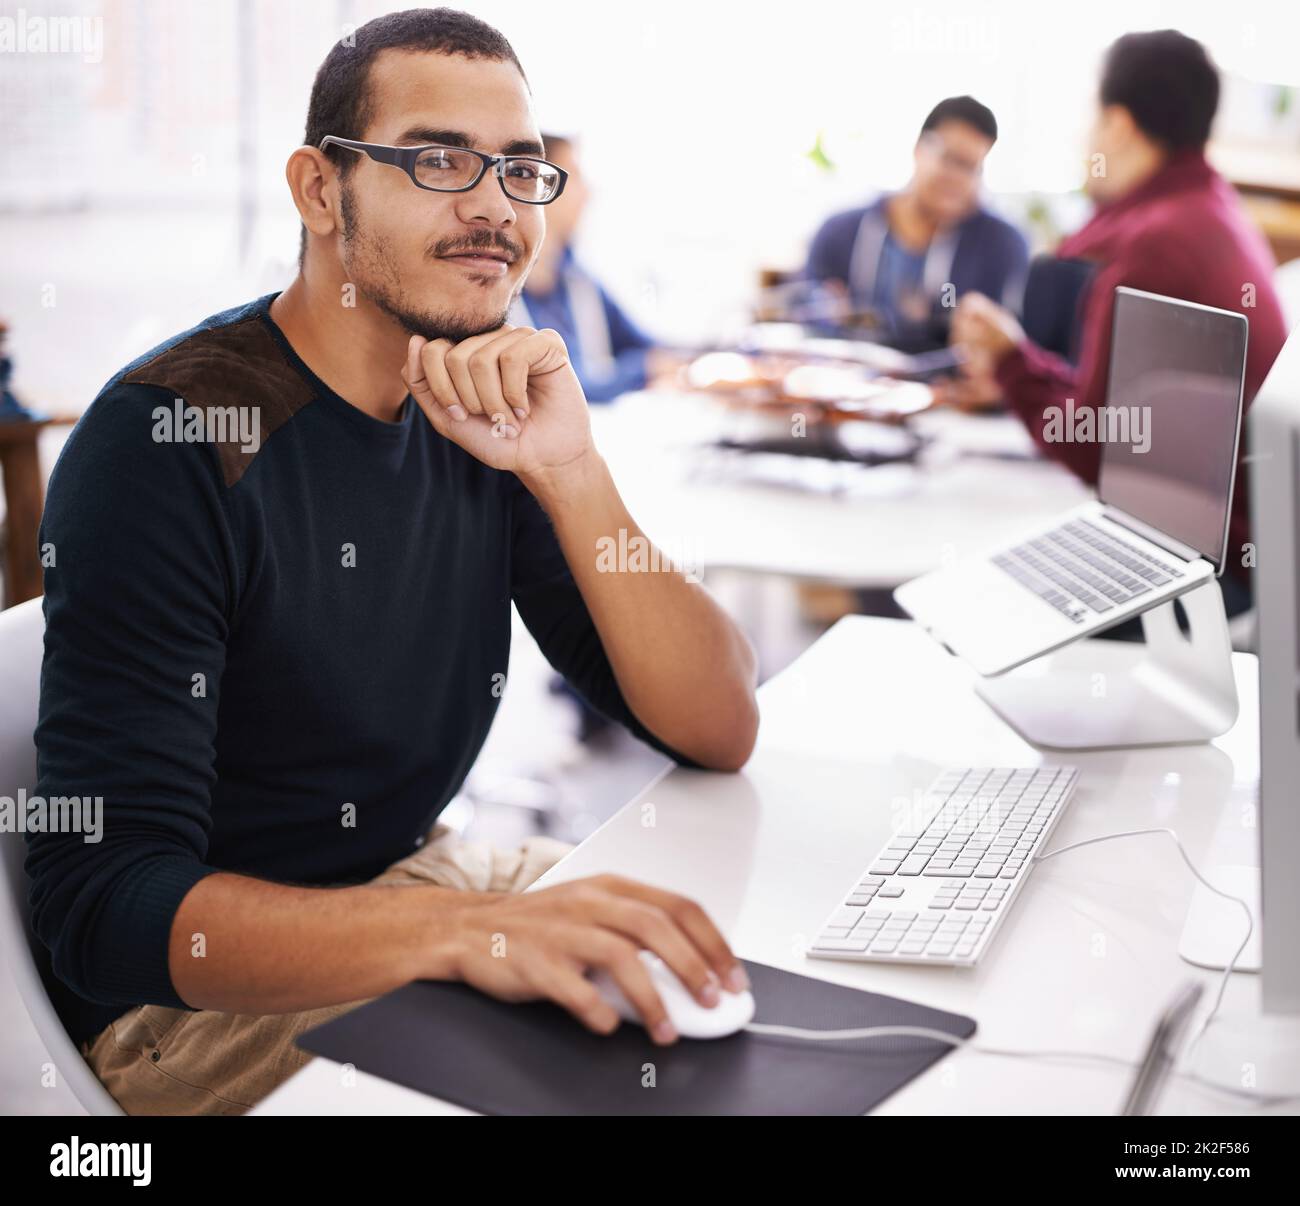 Confident with his role in the team. Cropped shot of a young man working on his laptop in an office. Stock Photo